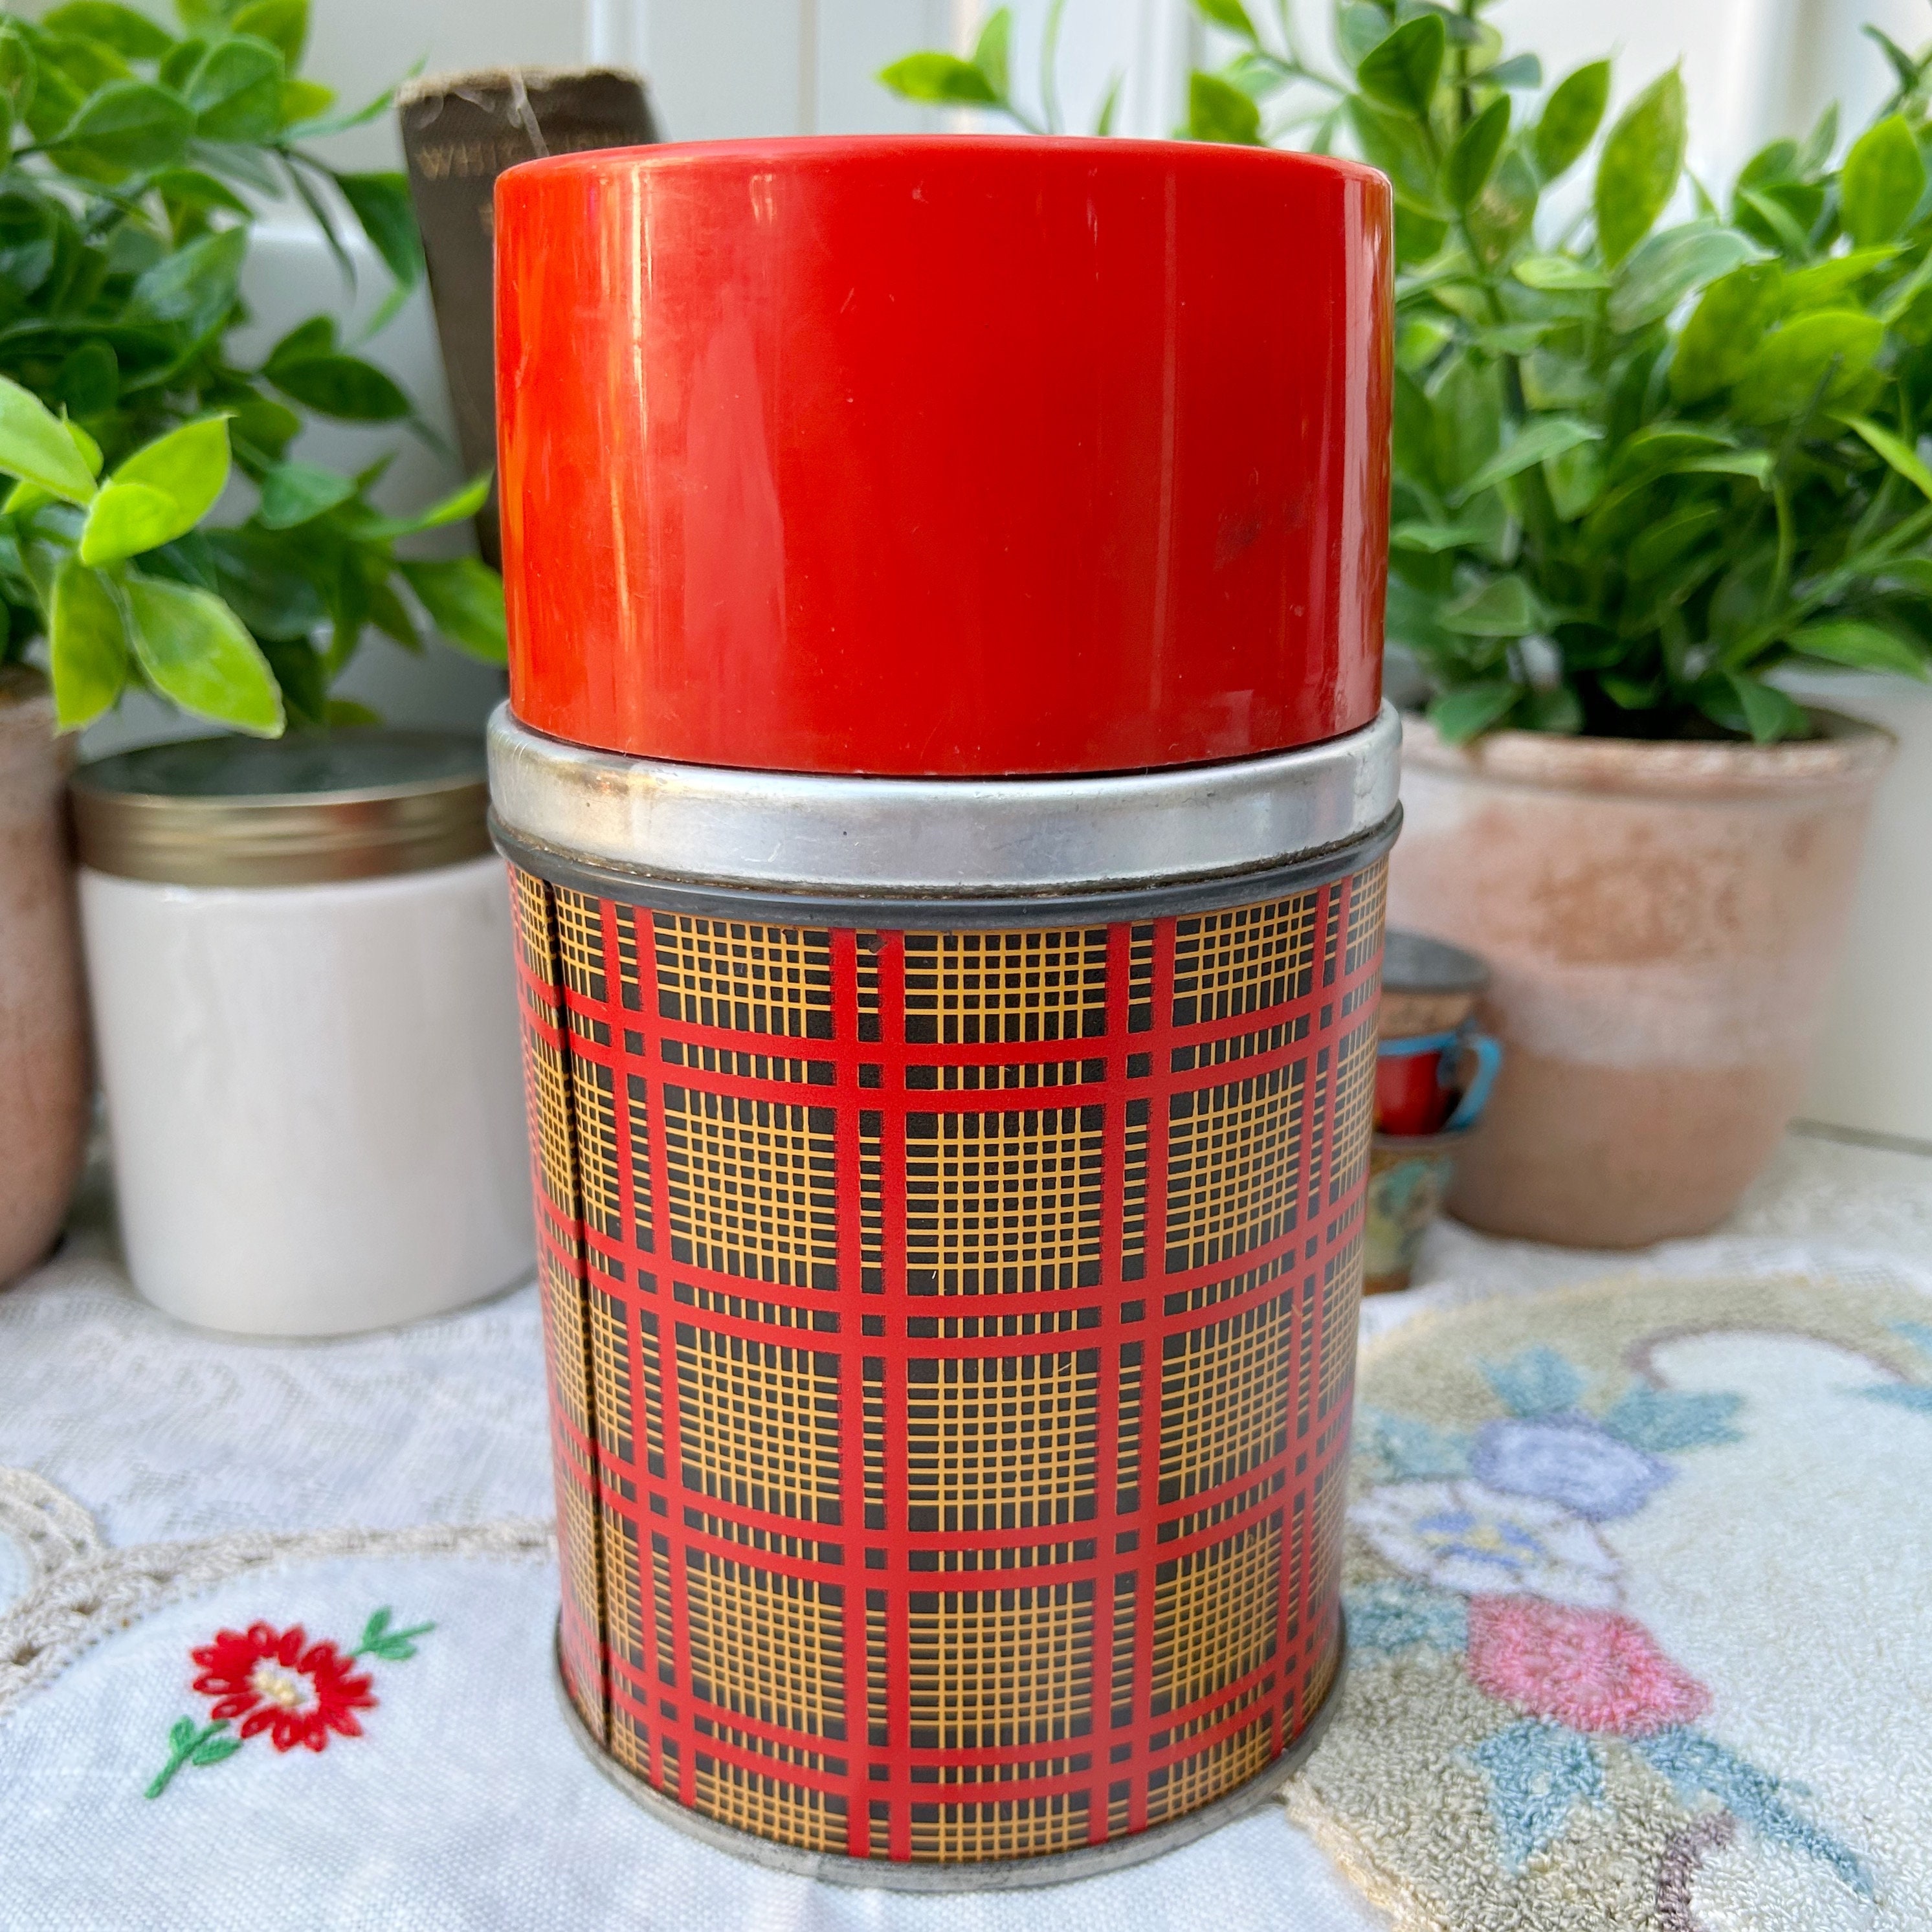 Vintage 1950s Aladdin Red Plaid Metal Lunch Box Thermos, Safety